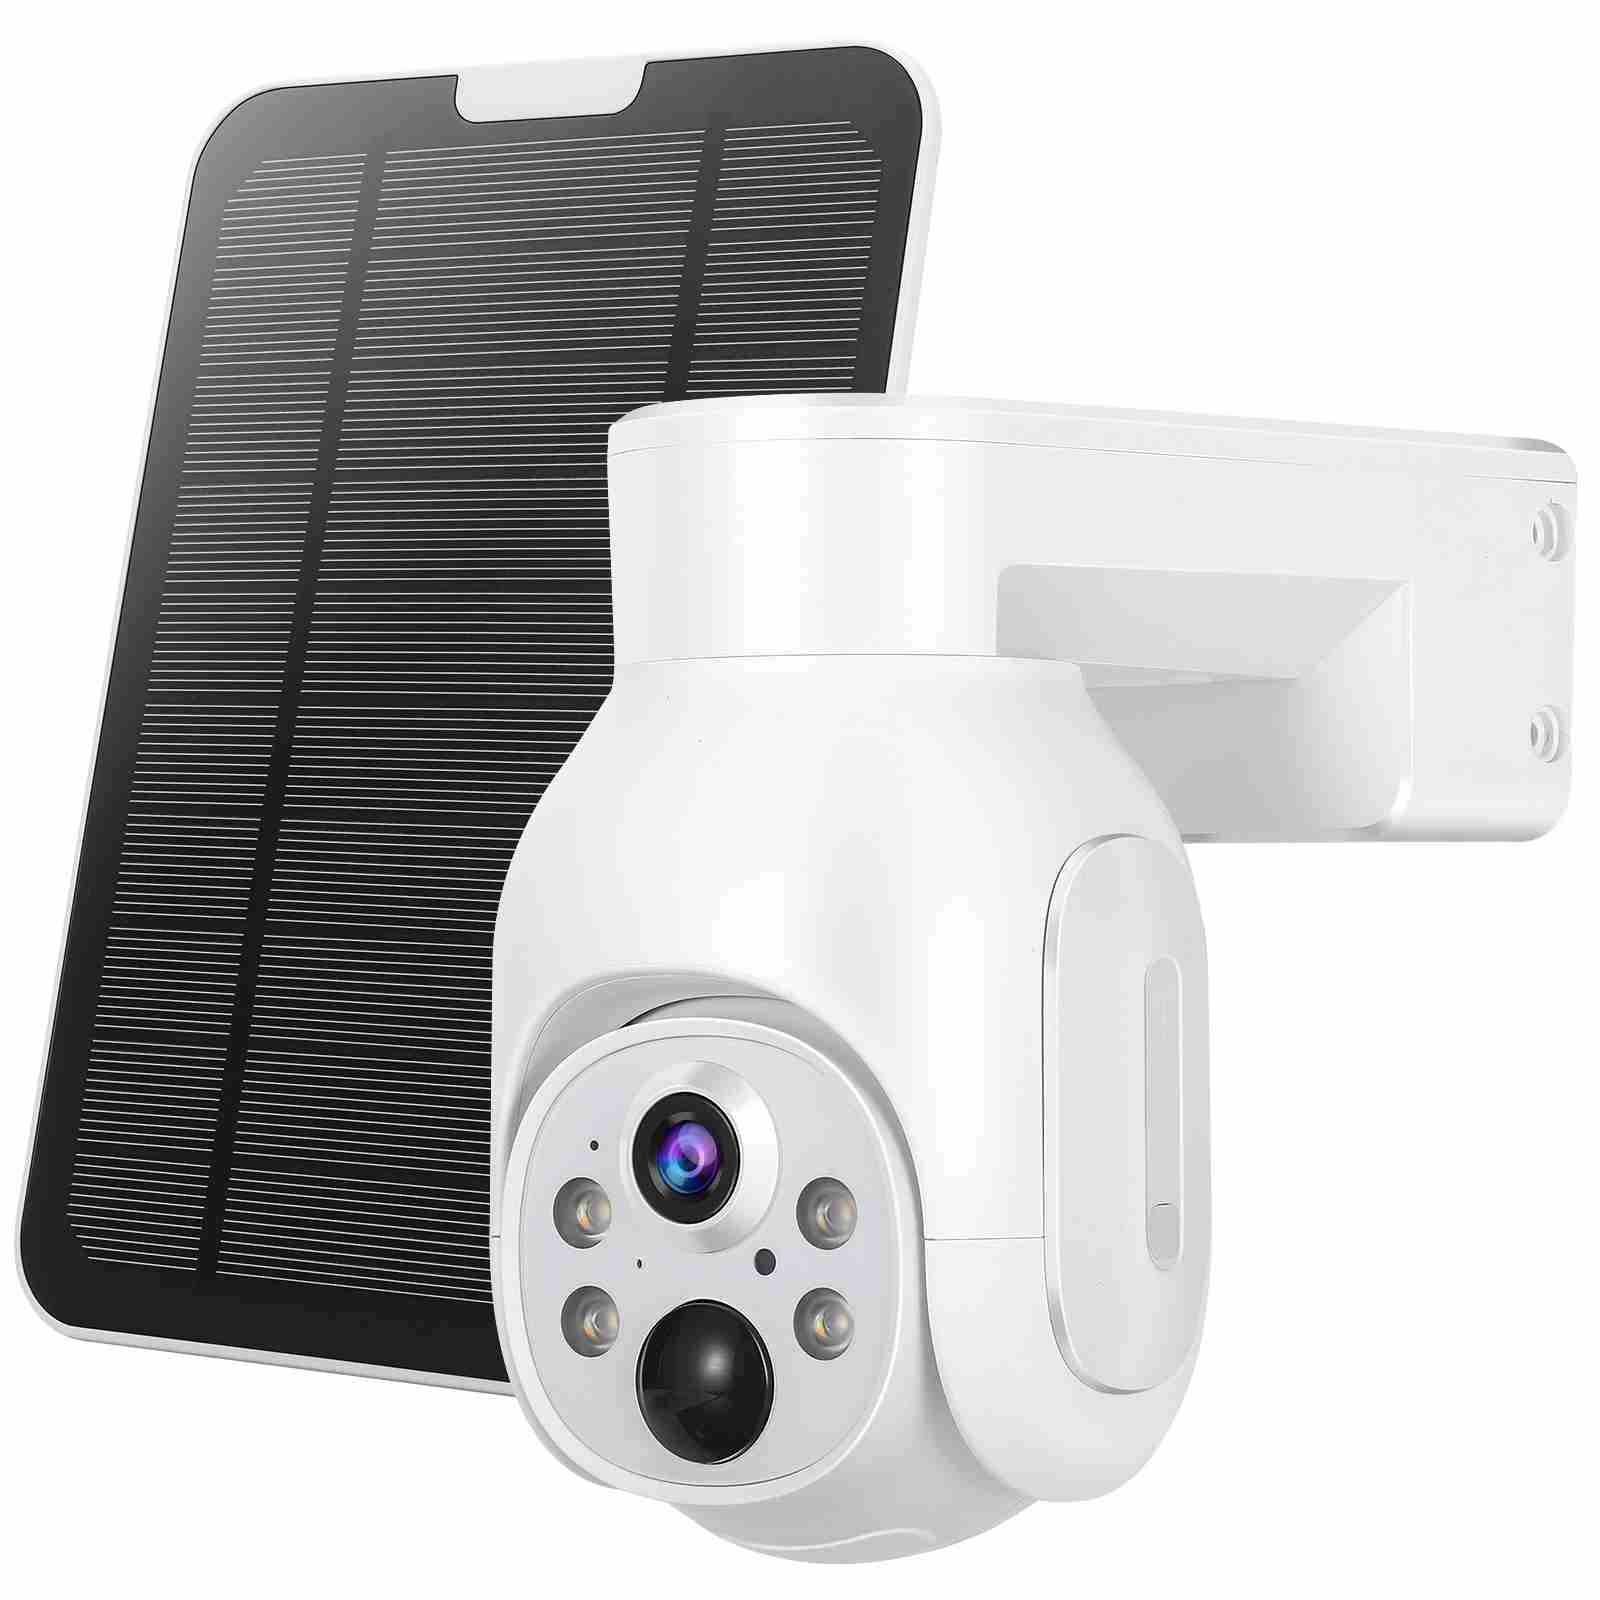 solar-security-camera-outdoor with cash back rebate